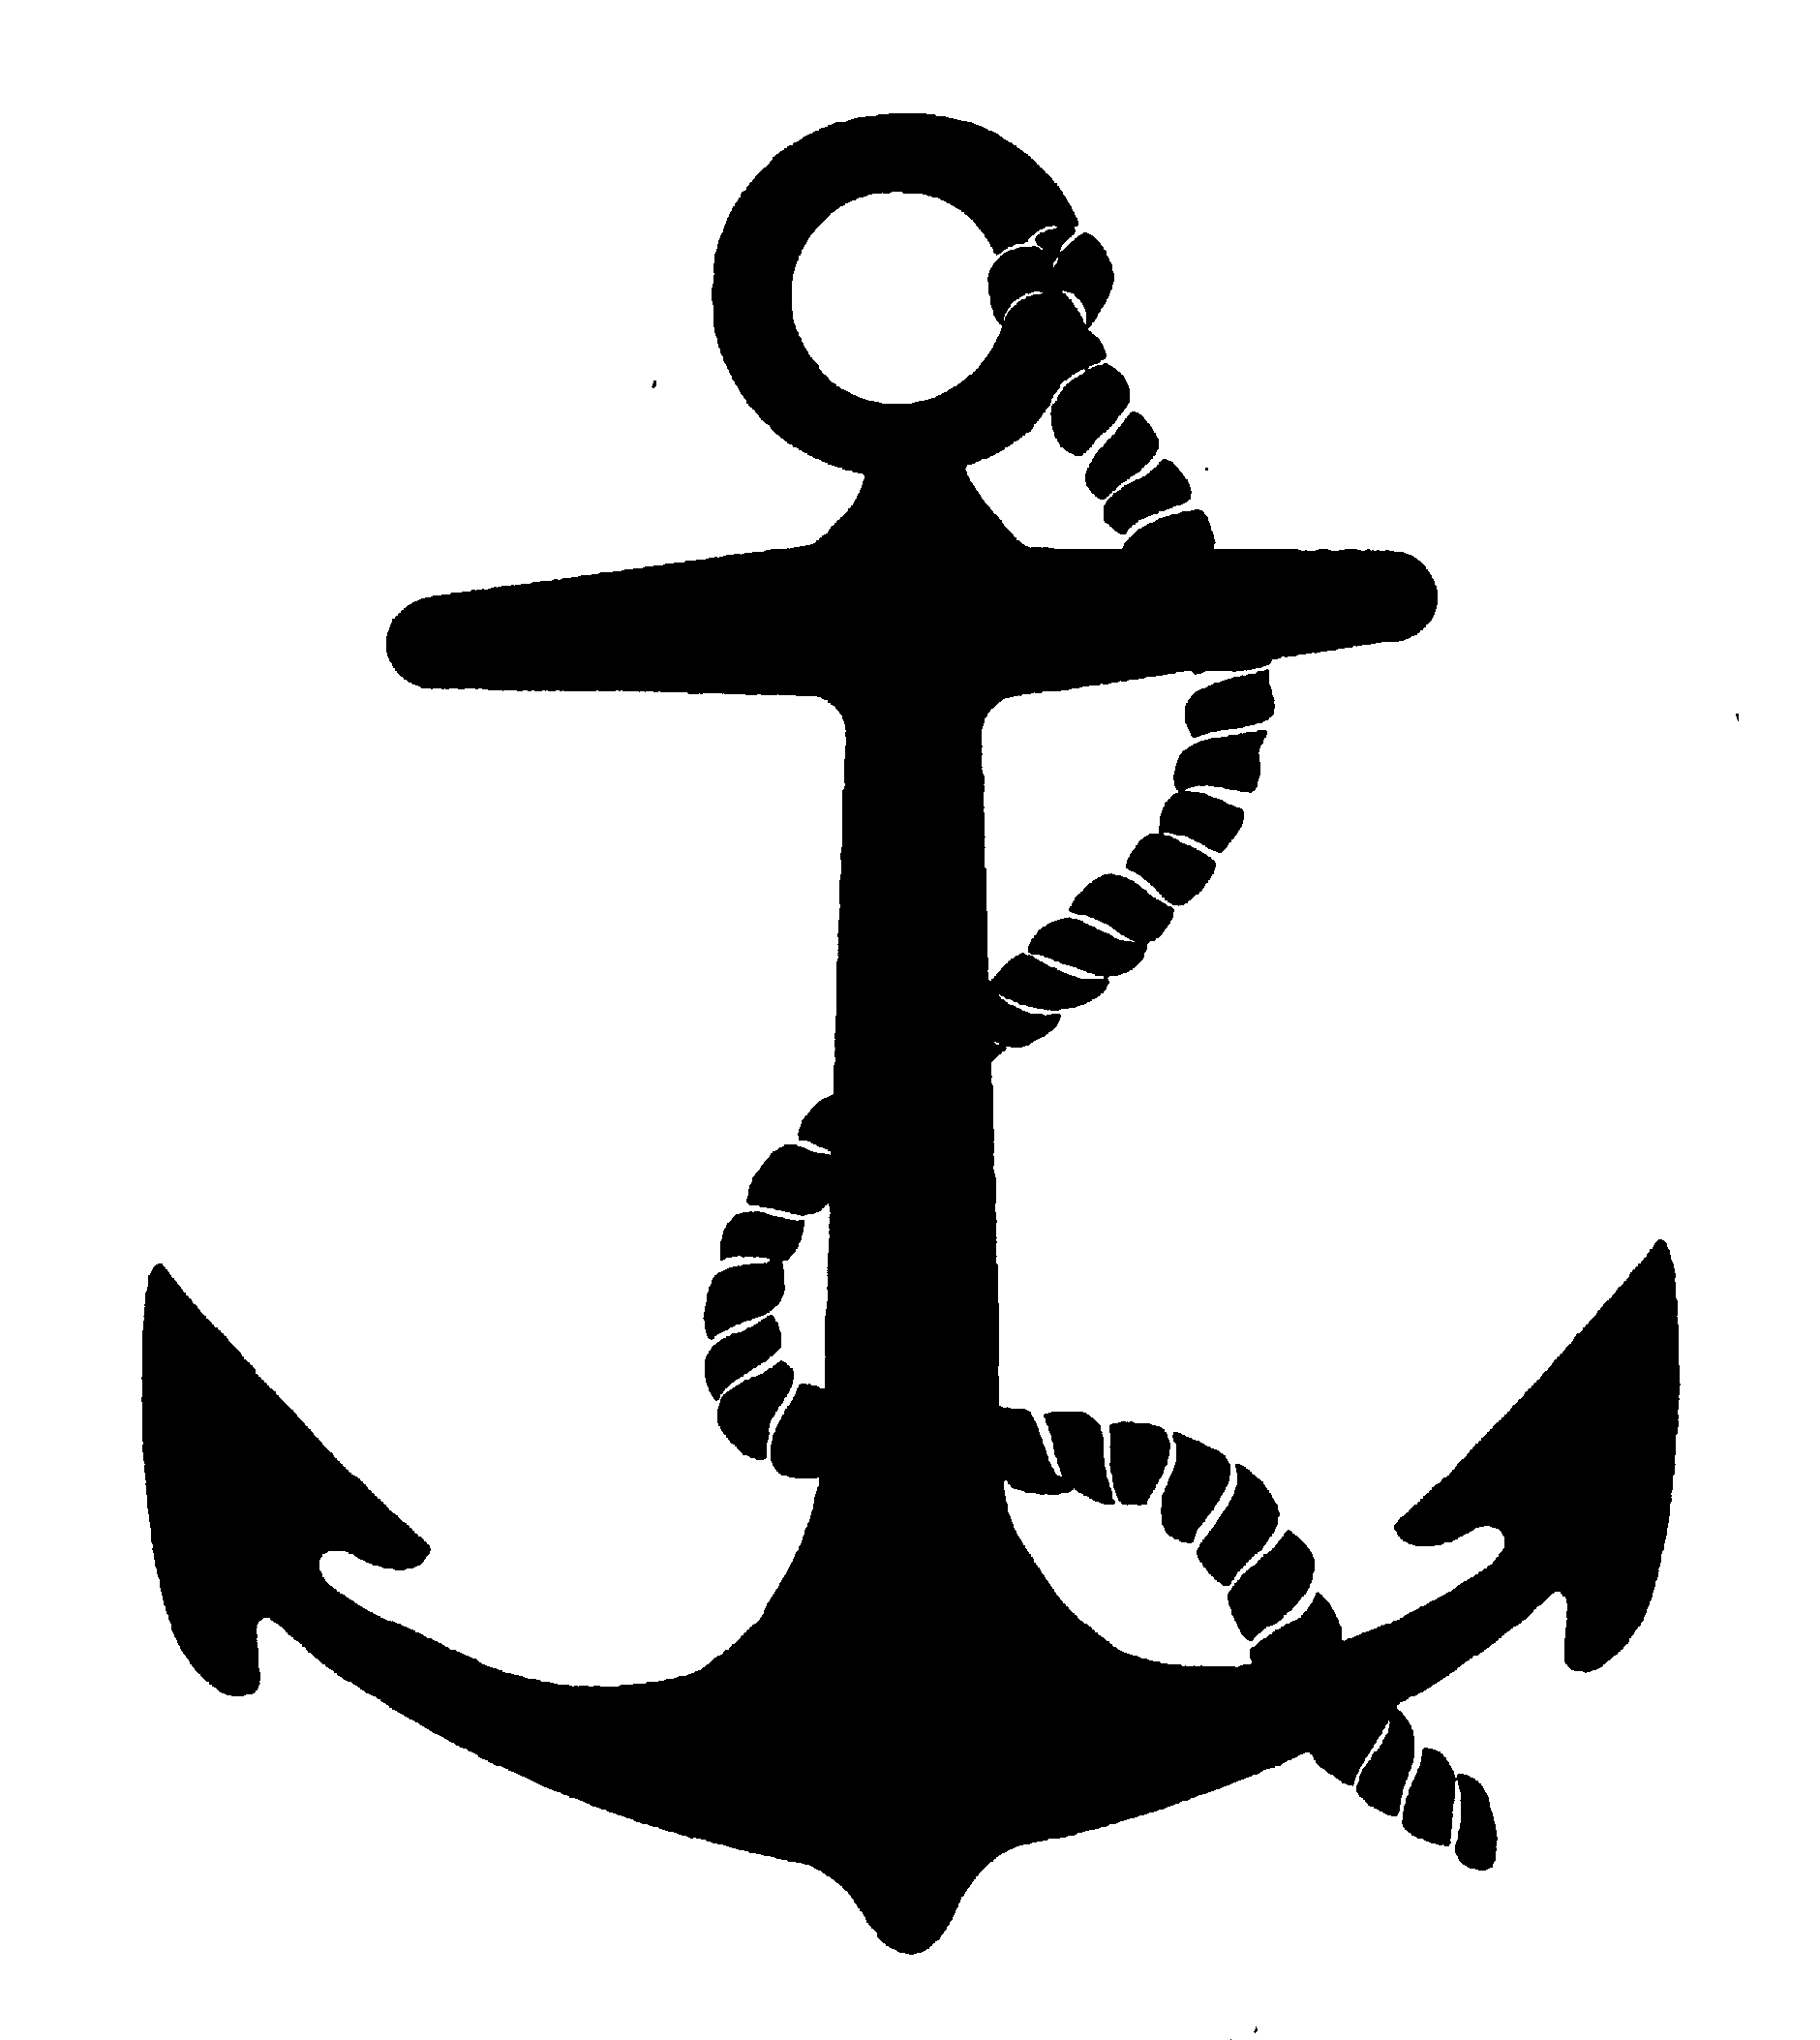 Anchor Black And White Clipart